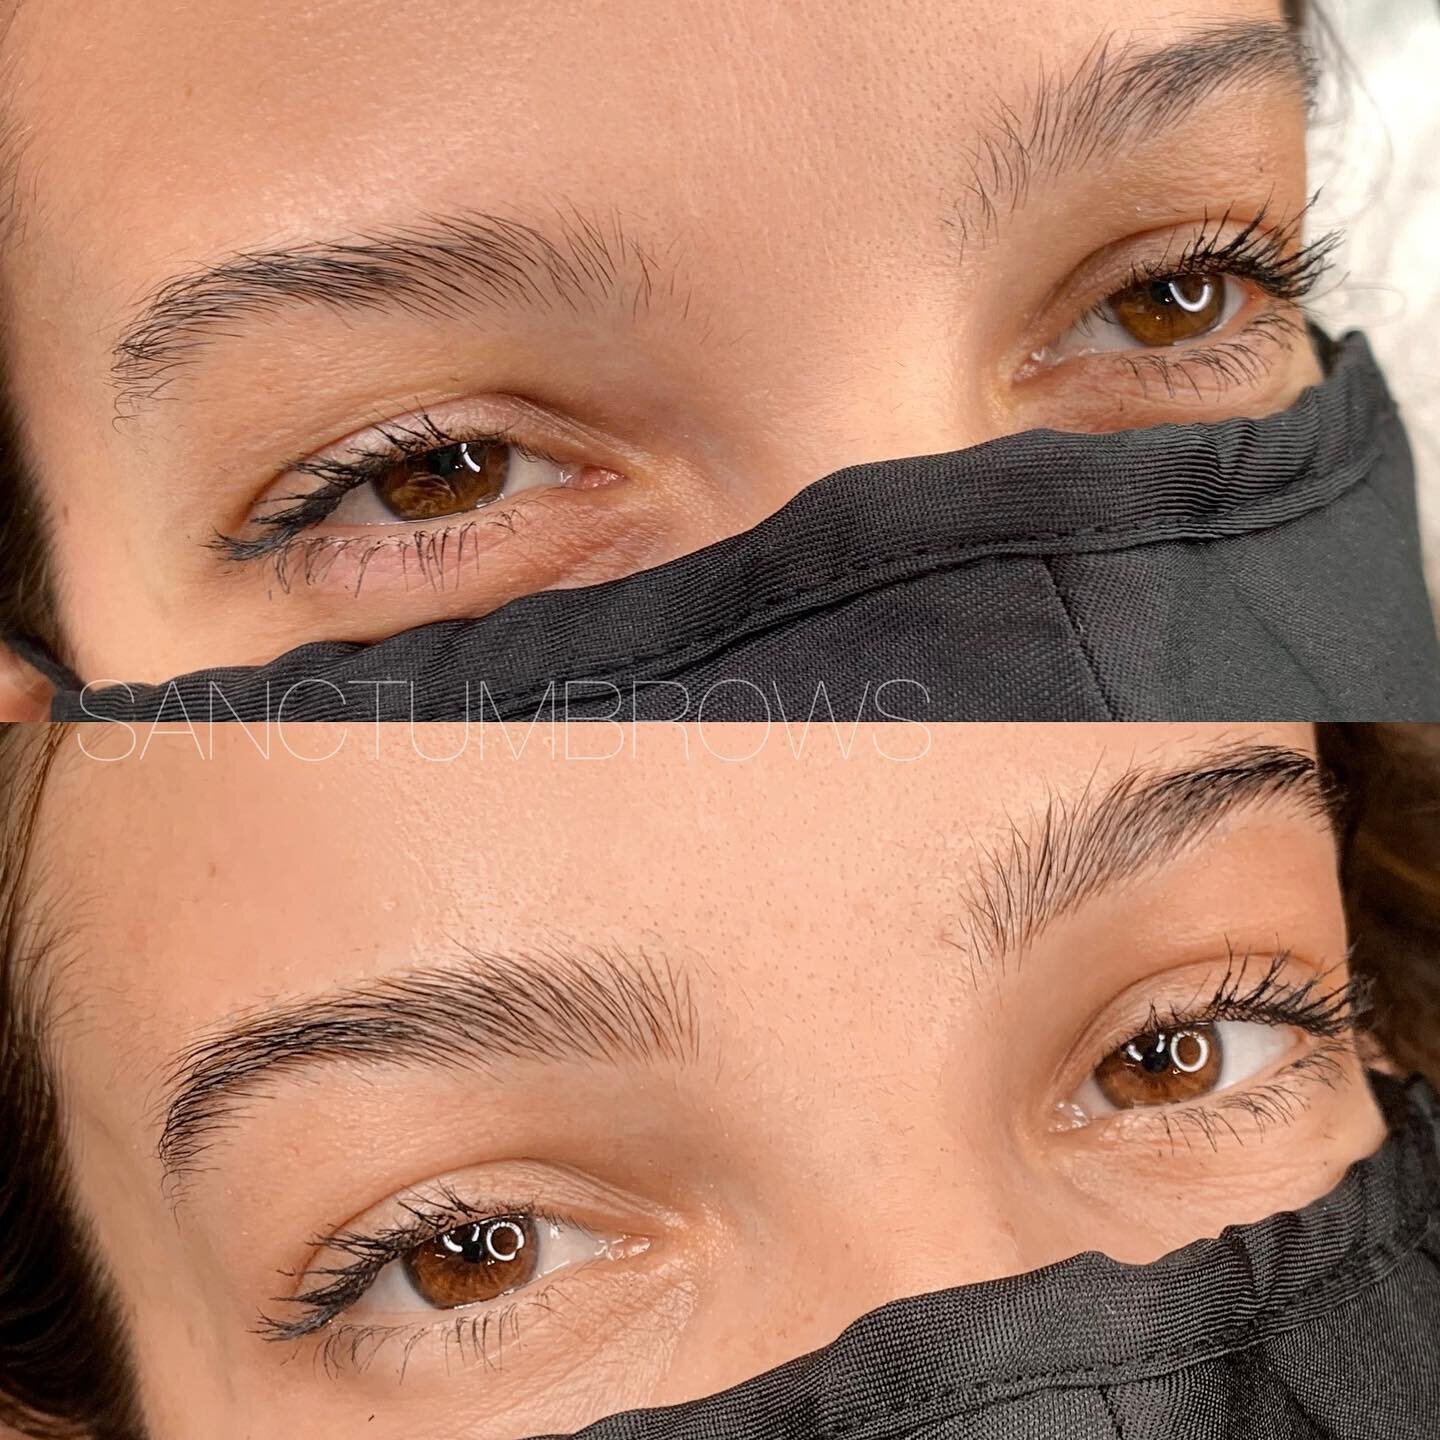 Can you even tell she had her brows Microbladed? 

Some clients aren&rsquo;t looking for a major transformation, just a subtle filling in of those sparse areas while staying true to their natural shape! 

What kind of transformations do you guys like